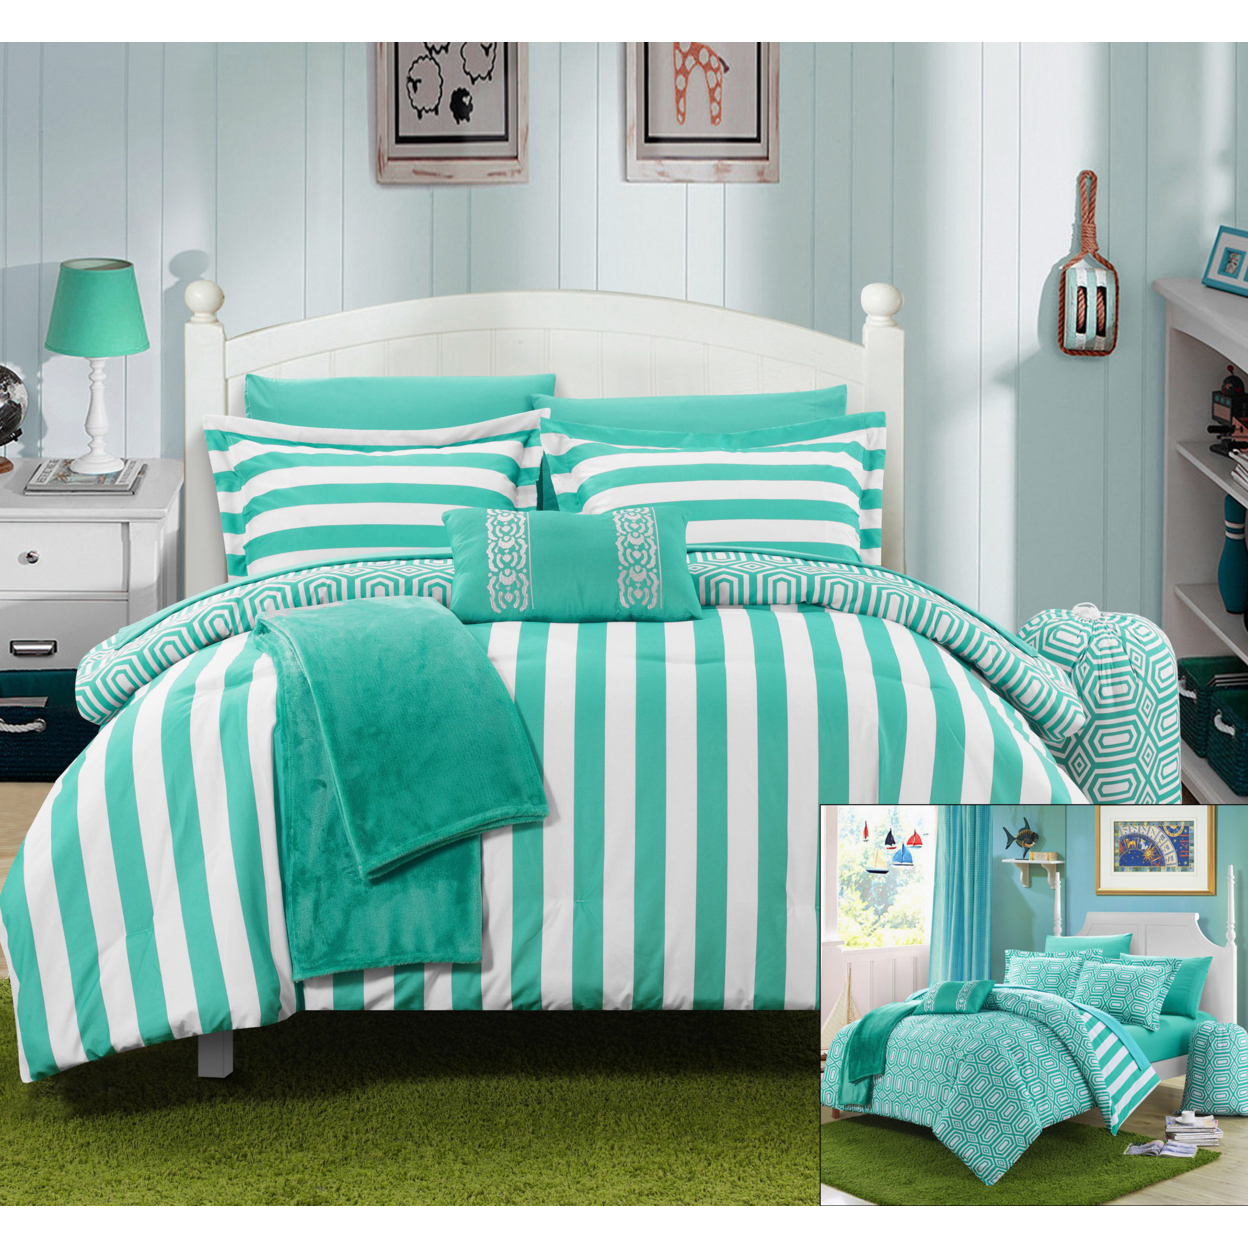 Chic Home 8/10 Piece Lyon Geometric And Striped Printed REVERSIBLE Comforter Set, Includes Sheets, Duffle Hamper And Fleece Throw - Aqua, Tw